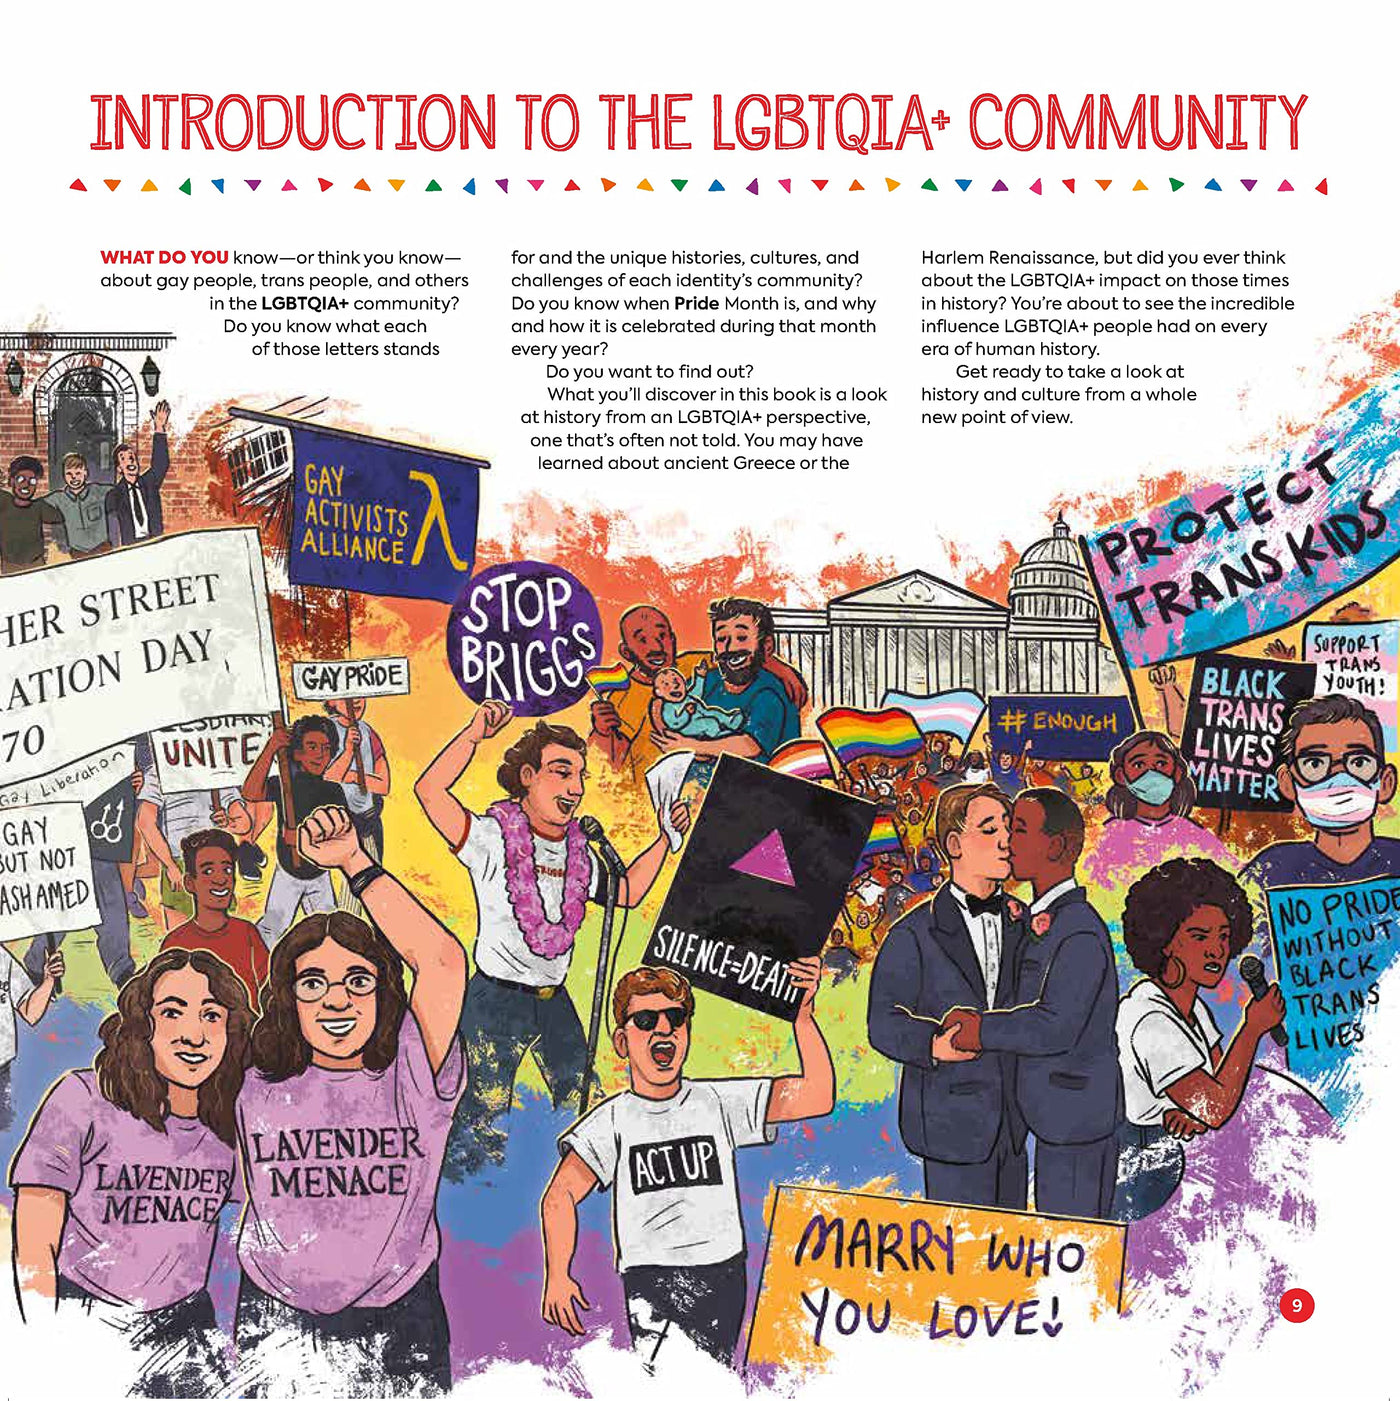 A Child's Introduction to Pride - The Inspirational History and Culture of the LGBTQIA+ Community Book